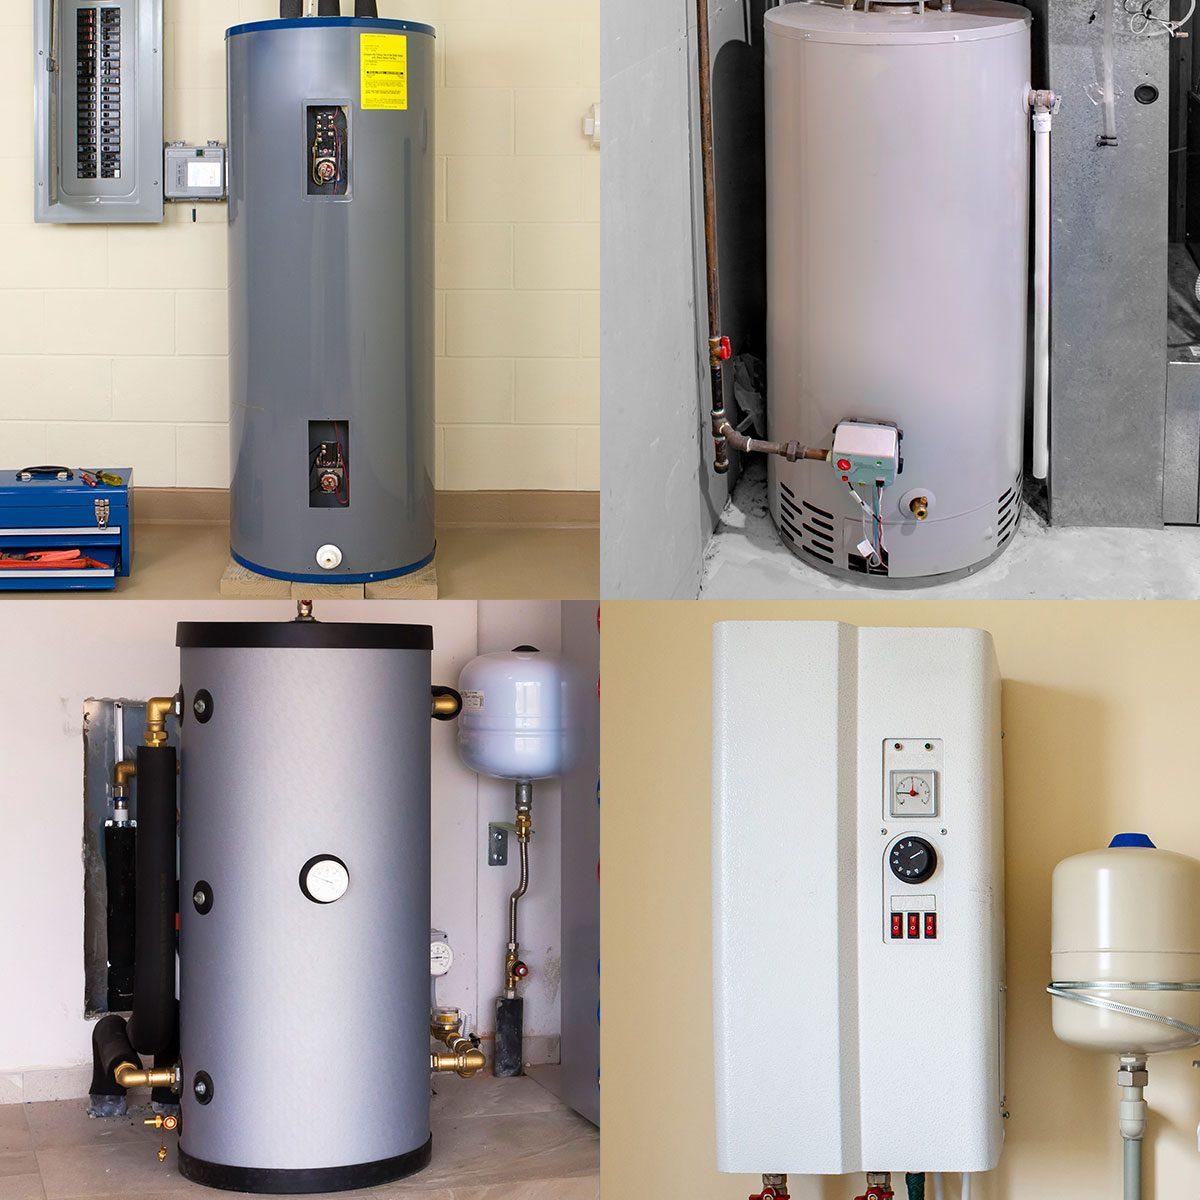 https://www.familyhandyman.com/wp-content/uploads/2022/01/new-homeowners-guide-to-water-heaters-ft-via-getty.com_.jpg?fit=700%2C1024